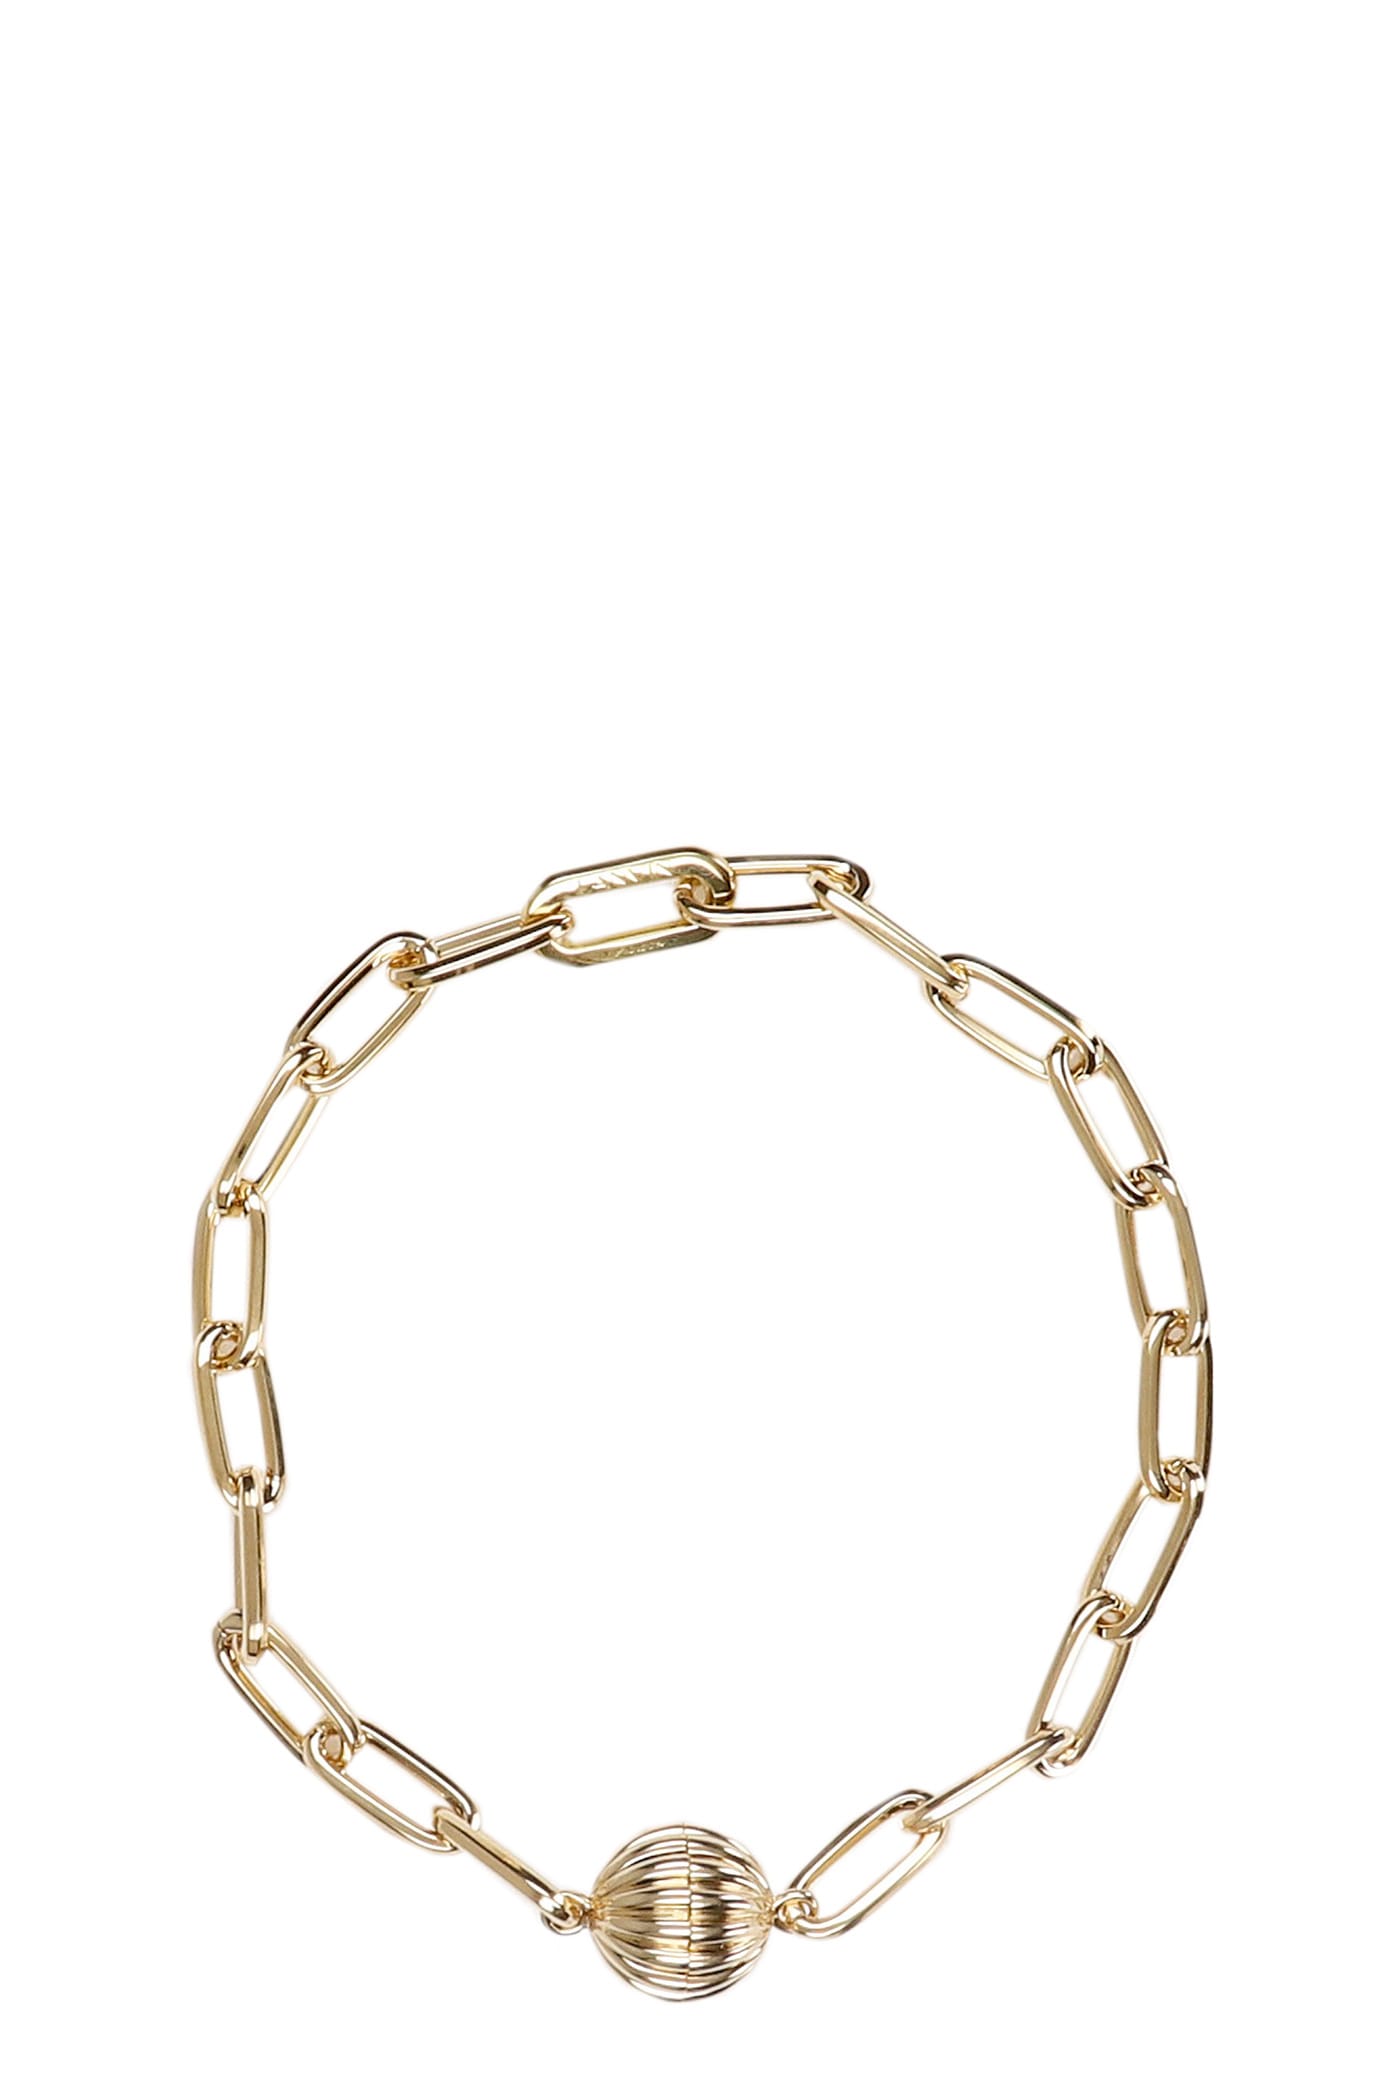 Lanvin Jewelry In Gold Metal Alloy